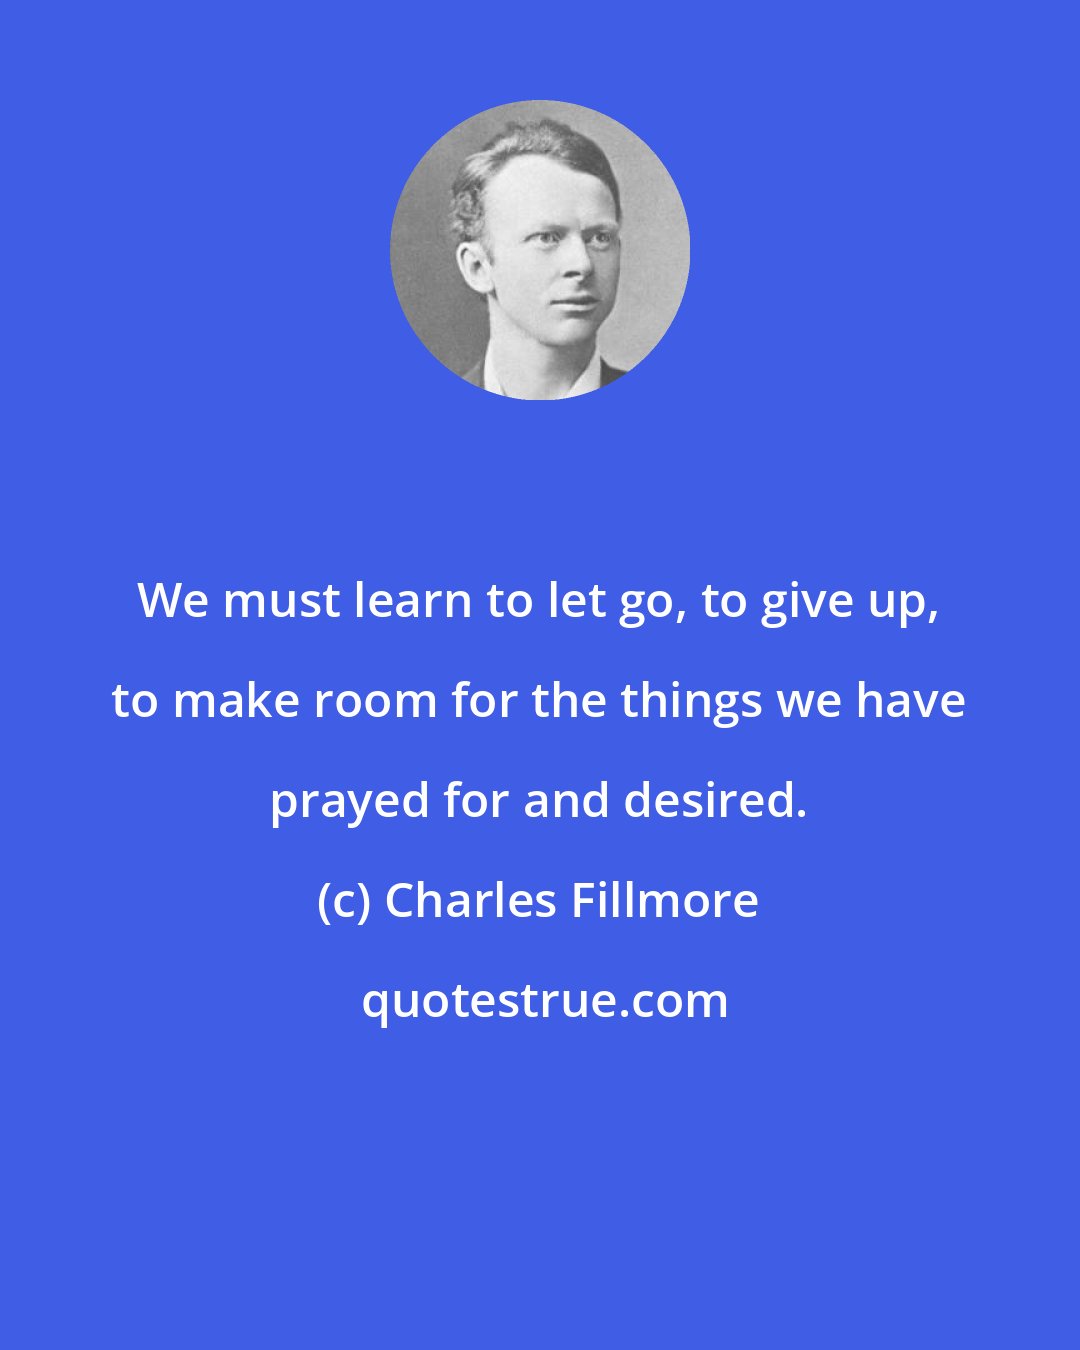 Charles Fillmore: We must learn to let go, to give up, to make room for the things we have prayed for and desired.